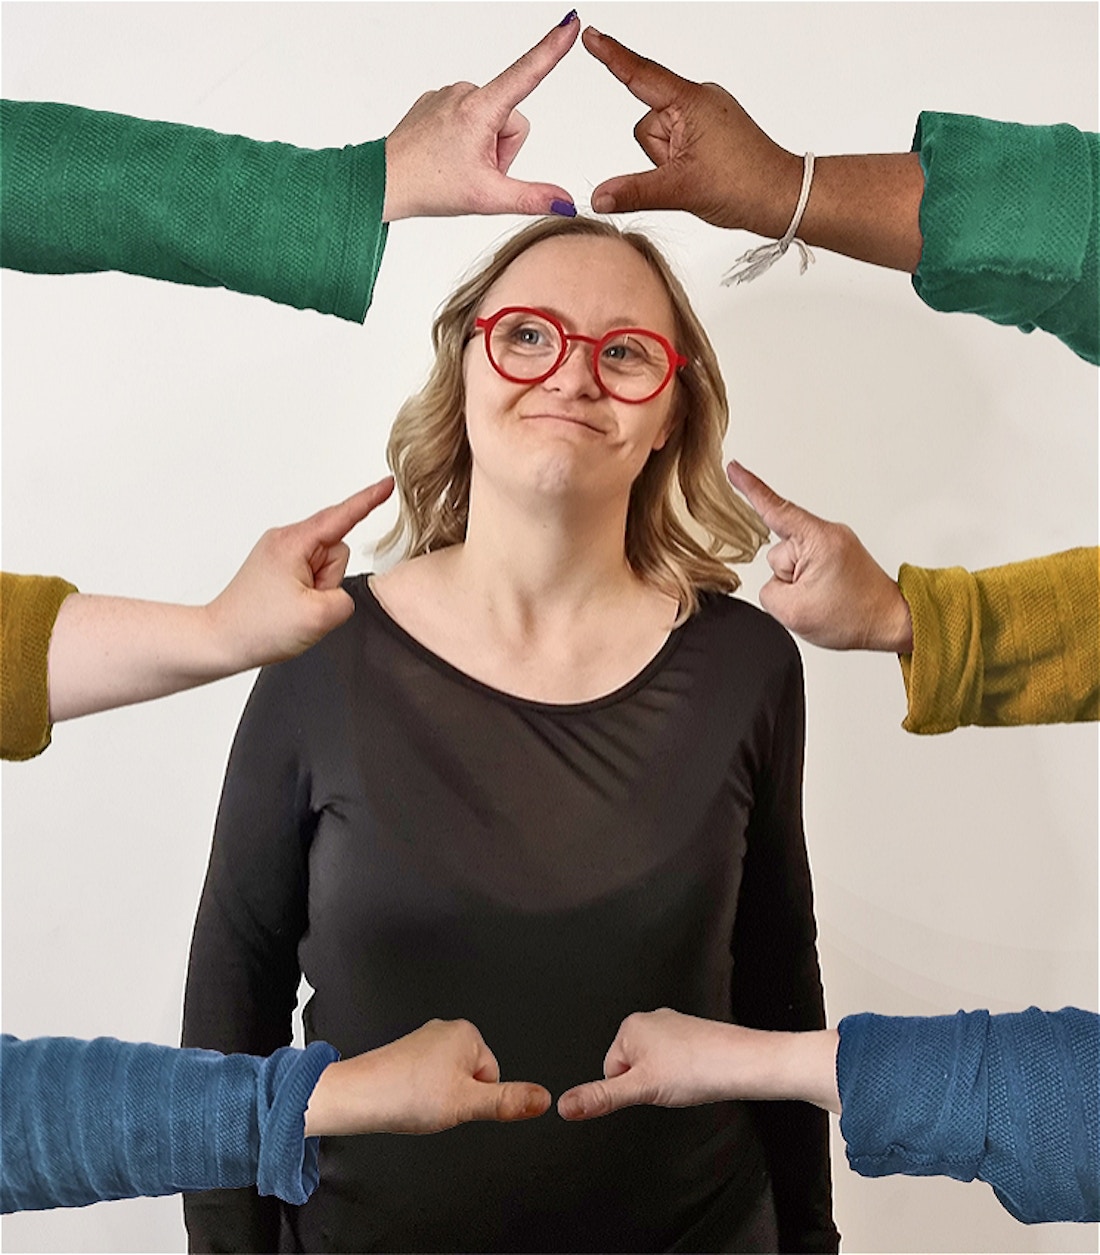 A woman with Down syndrome and blonde shoulder length hair in a black top and red glasses, smiling thoughtfully. 3 arms reach from outside of the frame on each side making different shapes with the hands framing the womans face and body.